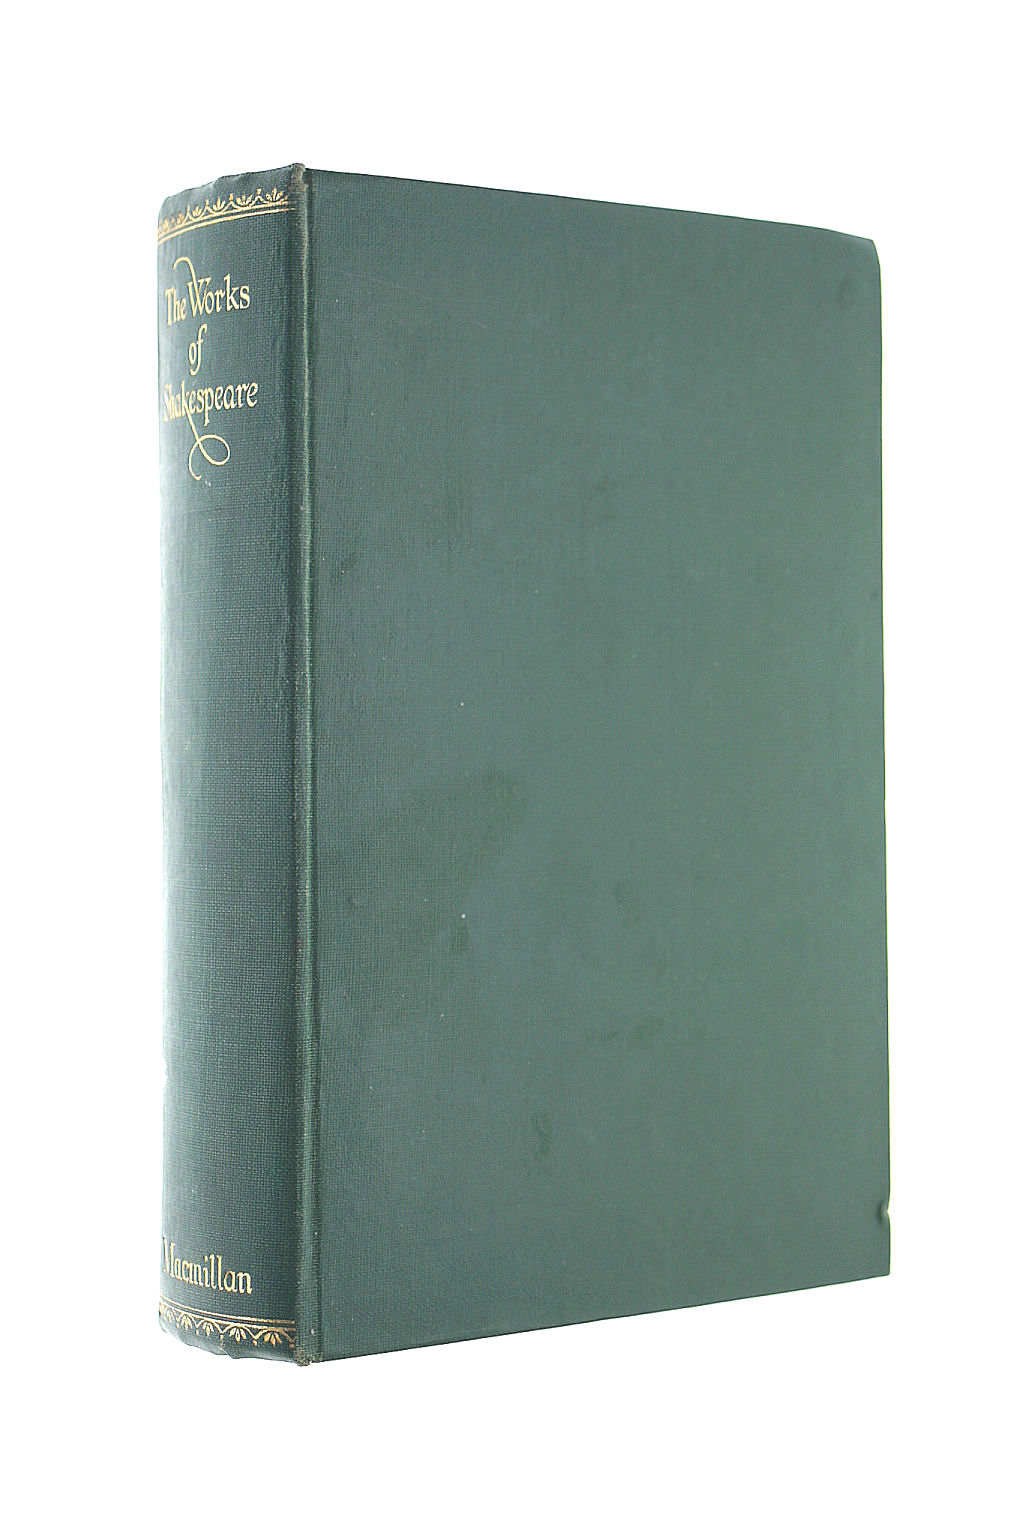 WILLIAM GEORGE CLARK AND WILLIAM ALDIS WRIGHT ( EDITORS ) - The Works Of Shakespeare - The Globe Edition